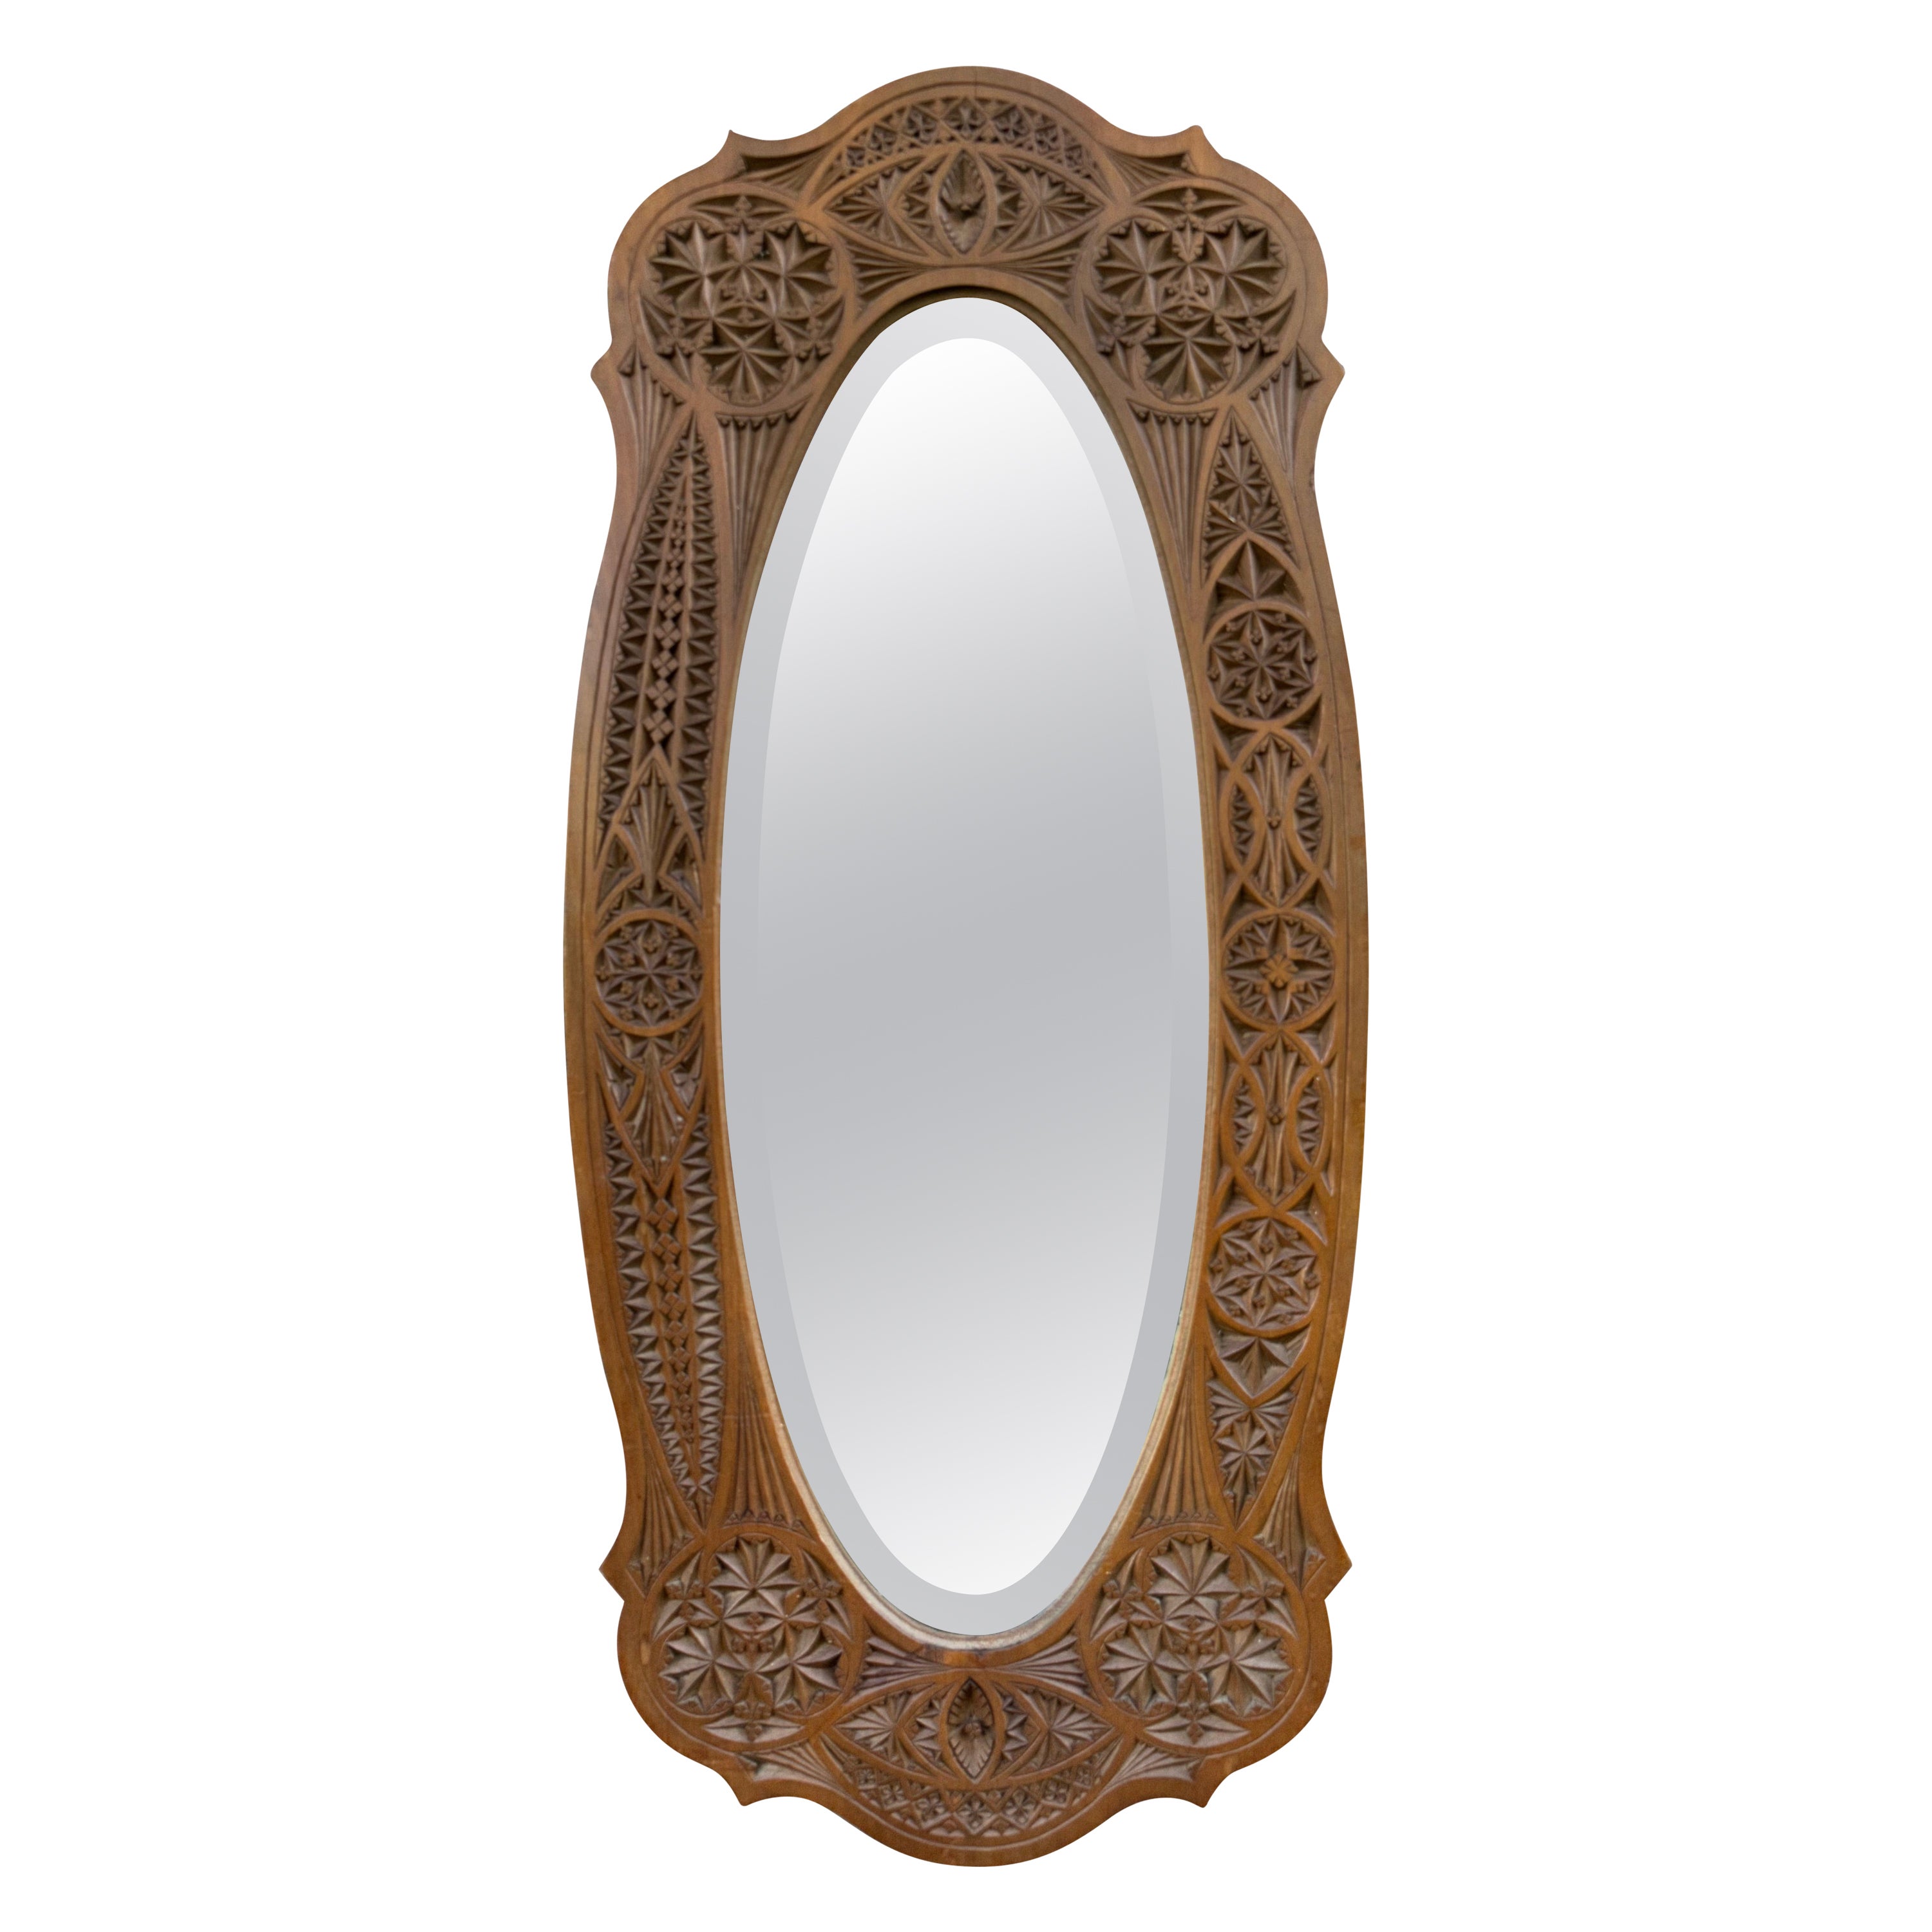 Rare & Beautifully Hand-Carved Antique Dutch Arts & Crafts Beveled Wall Mirror For Sale